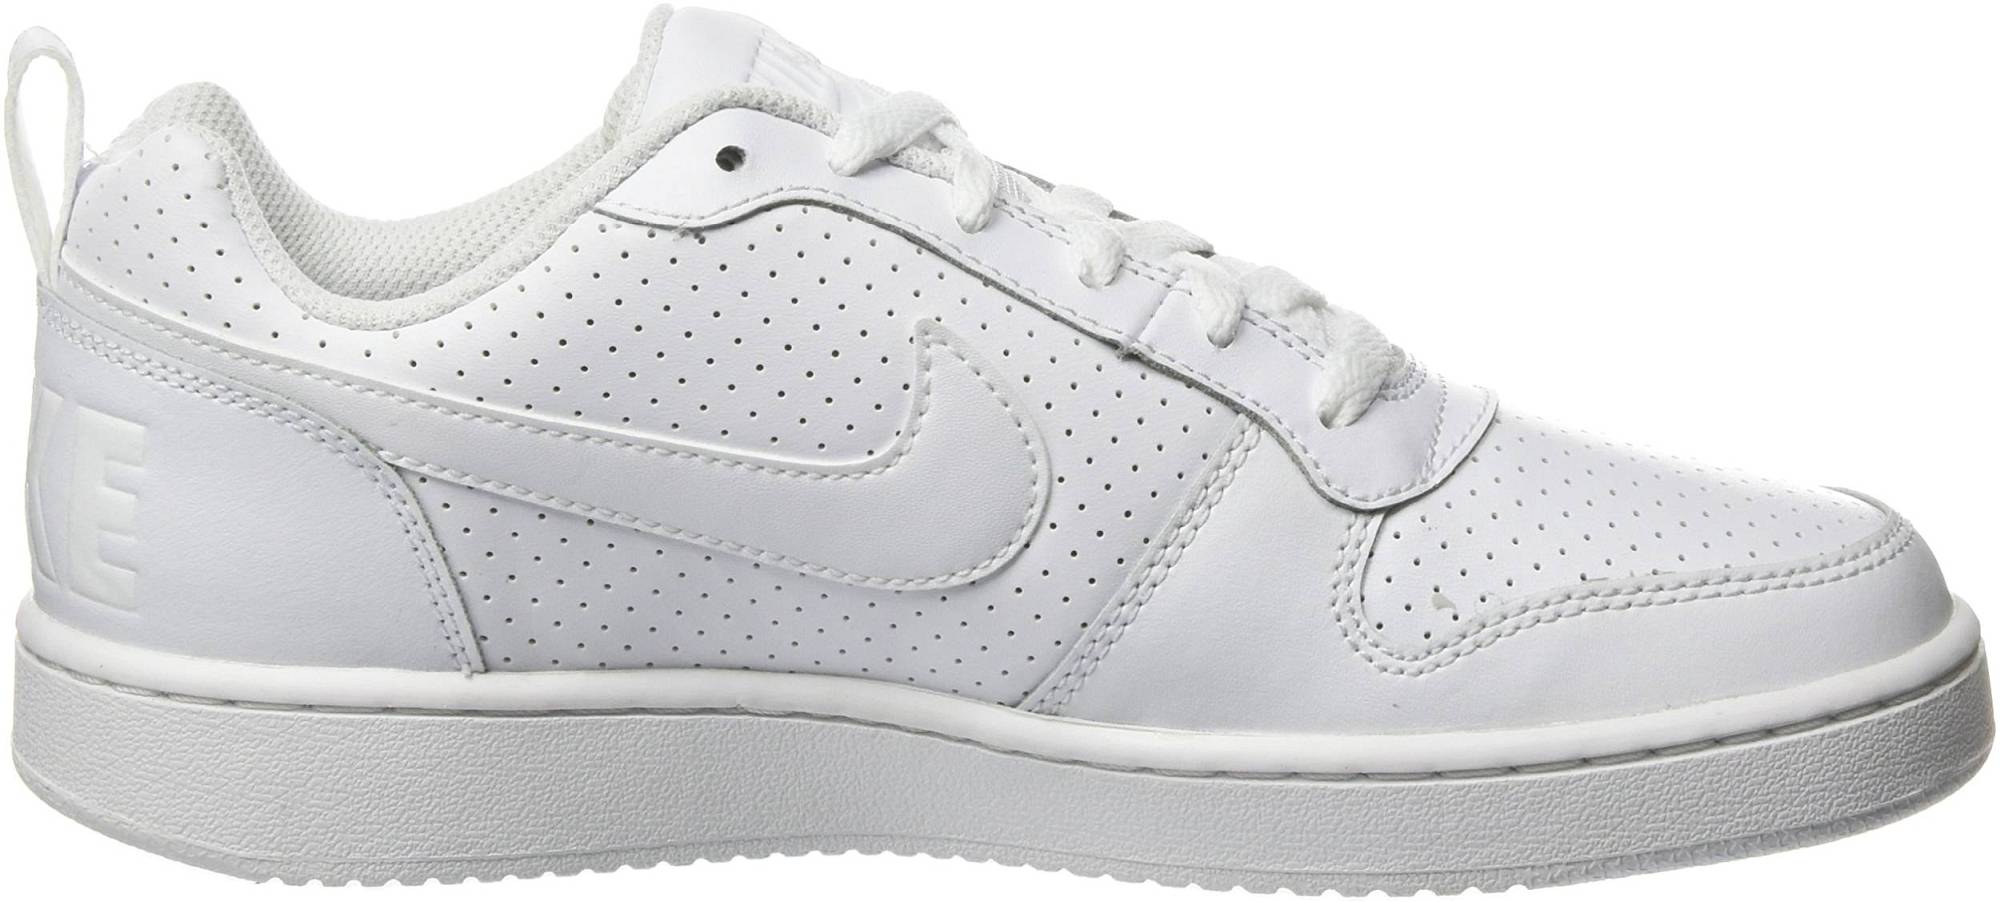 Nike Court Borough Low Shoes Reviews Reasons To Buy